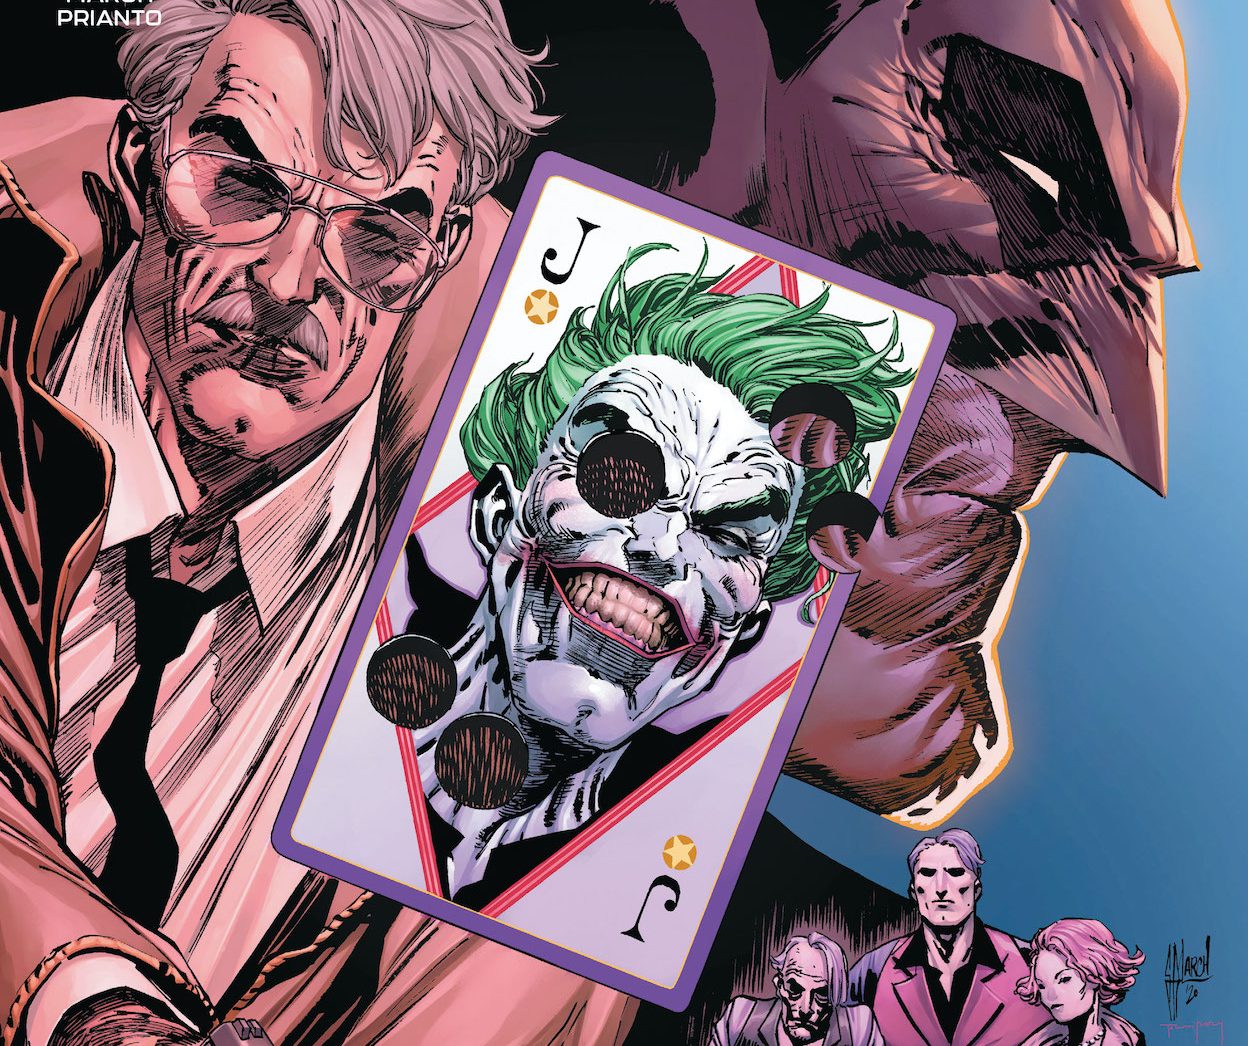 'The Joker' #2 brings the Batman and Oracle into the mix